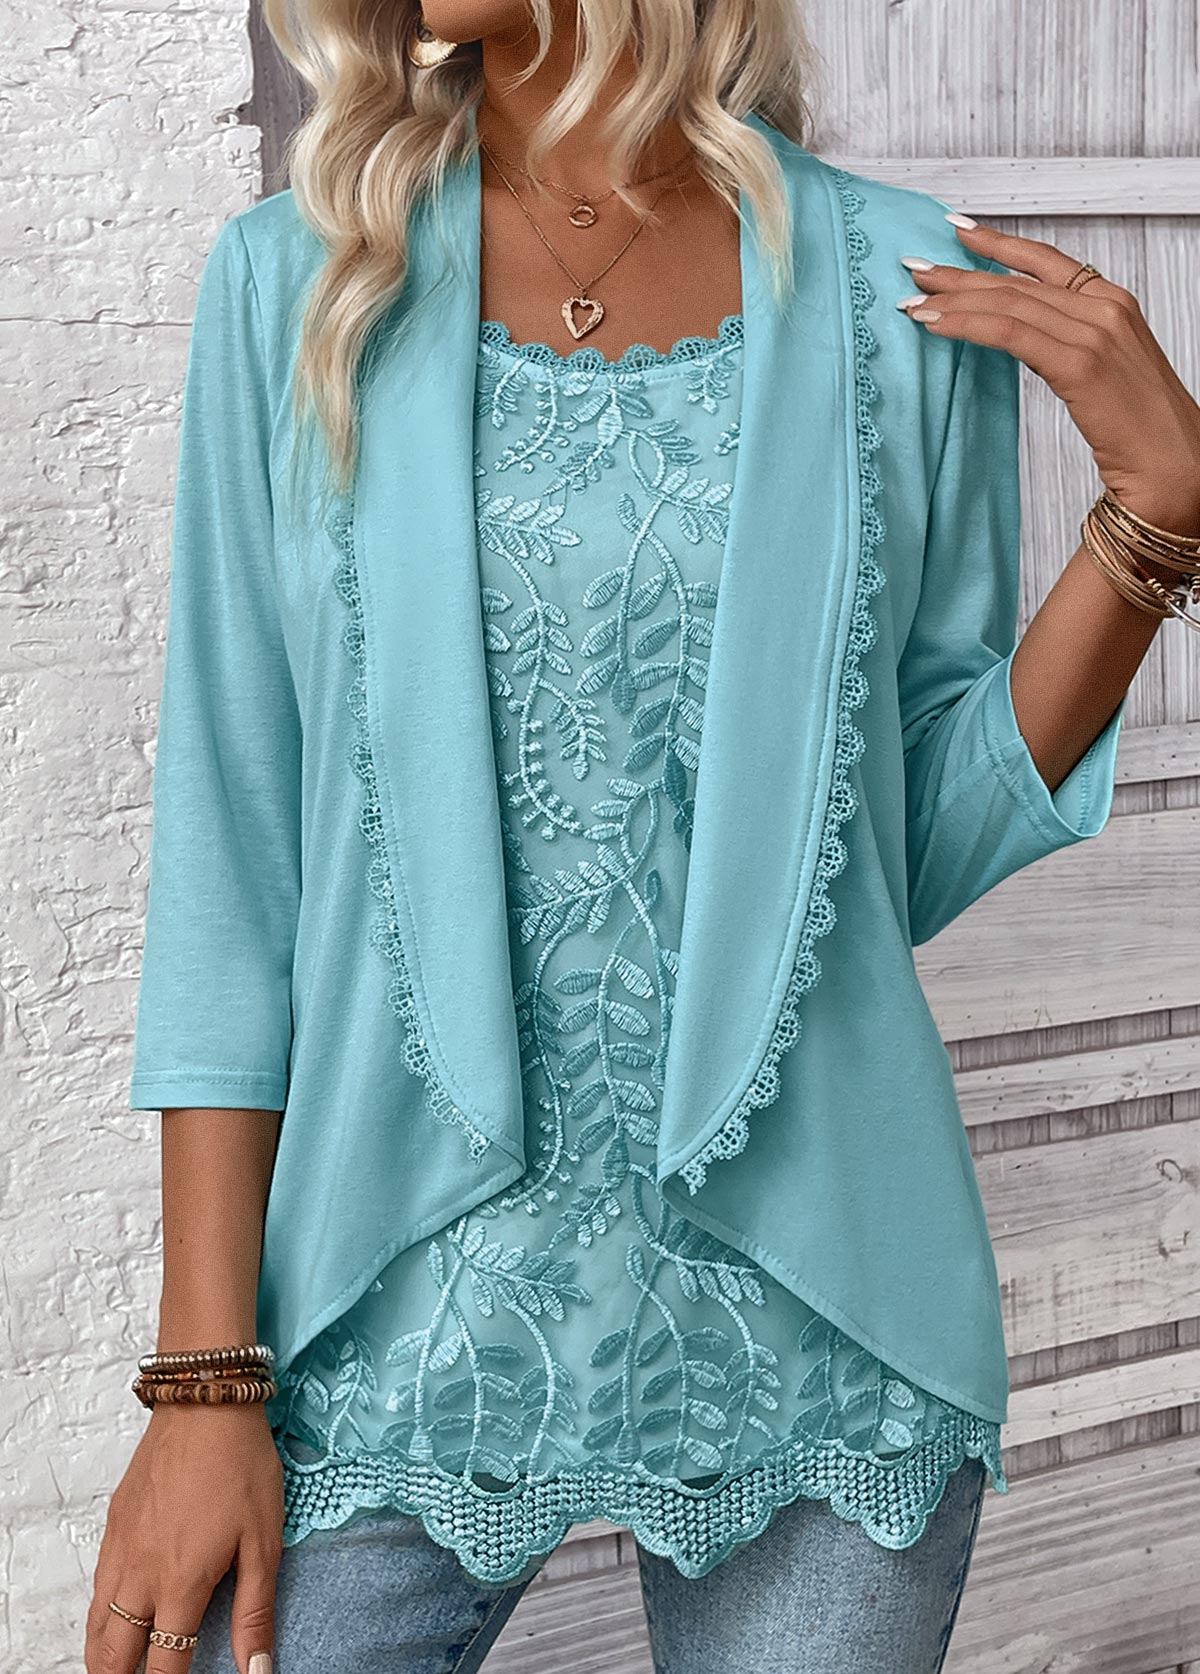 Lace Mint Green 3/4 Sleeve Square Neck T Shirt